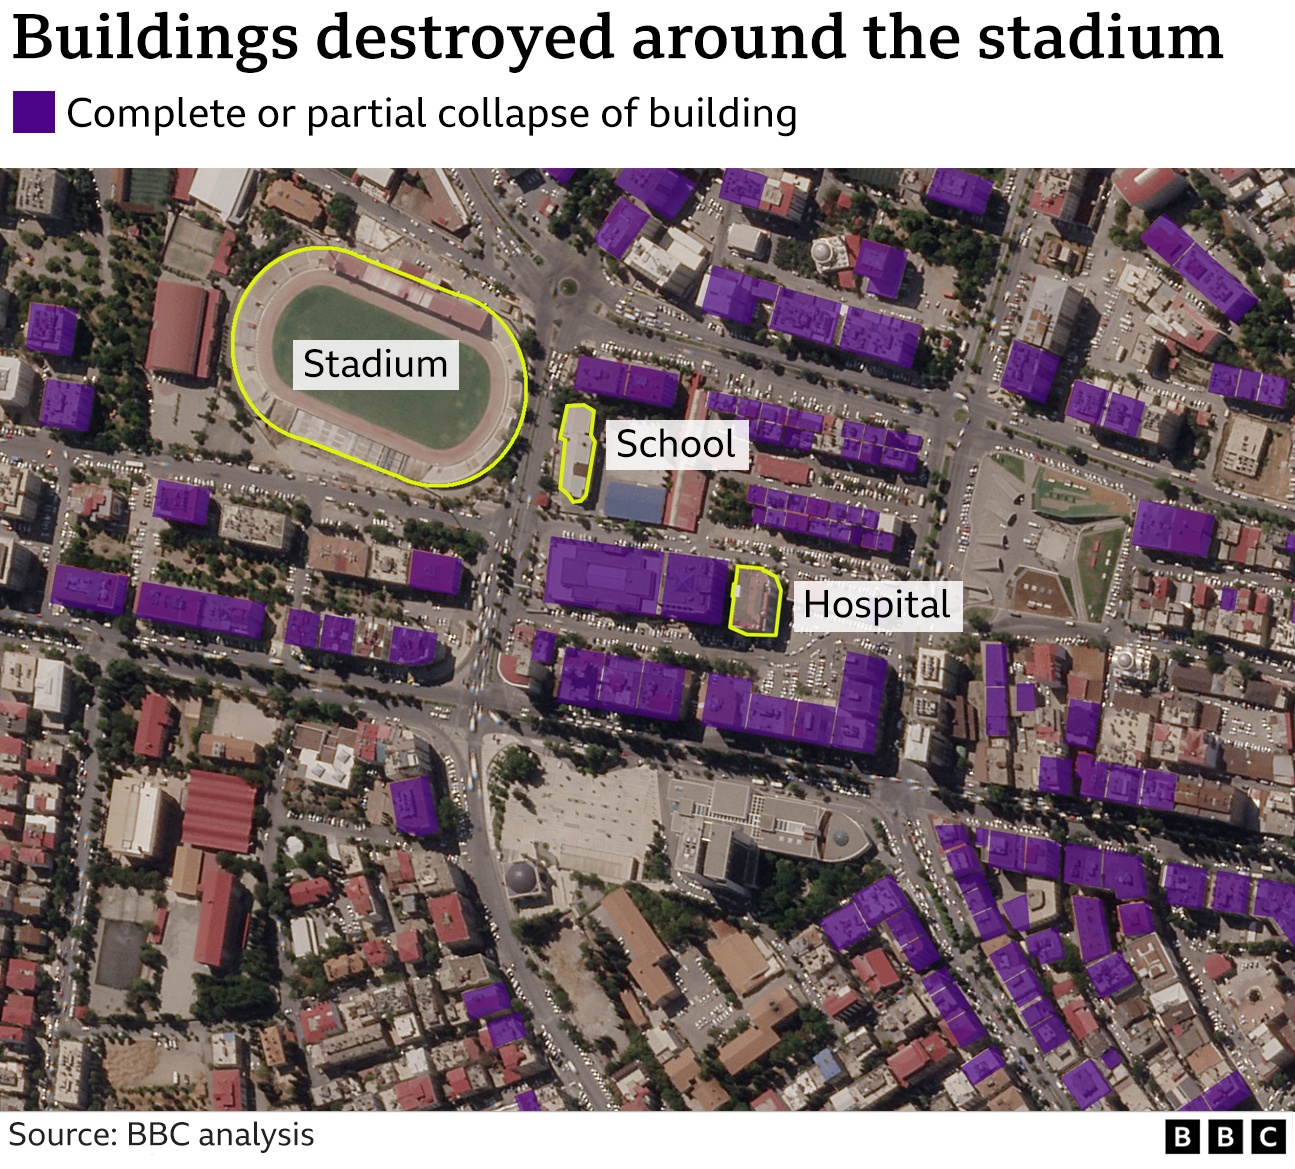 Satellite image showing which buildings near the stadium have been destroyed